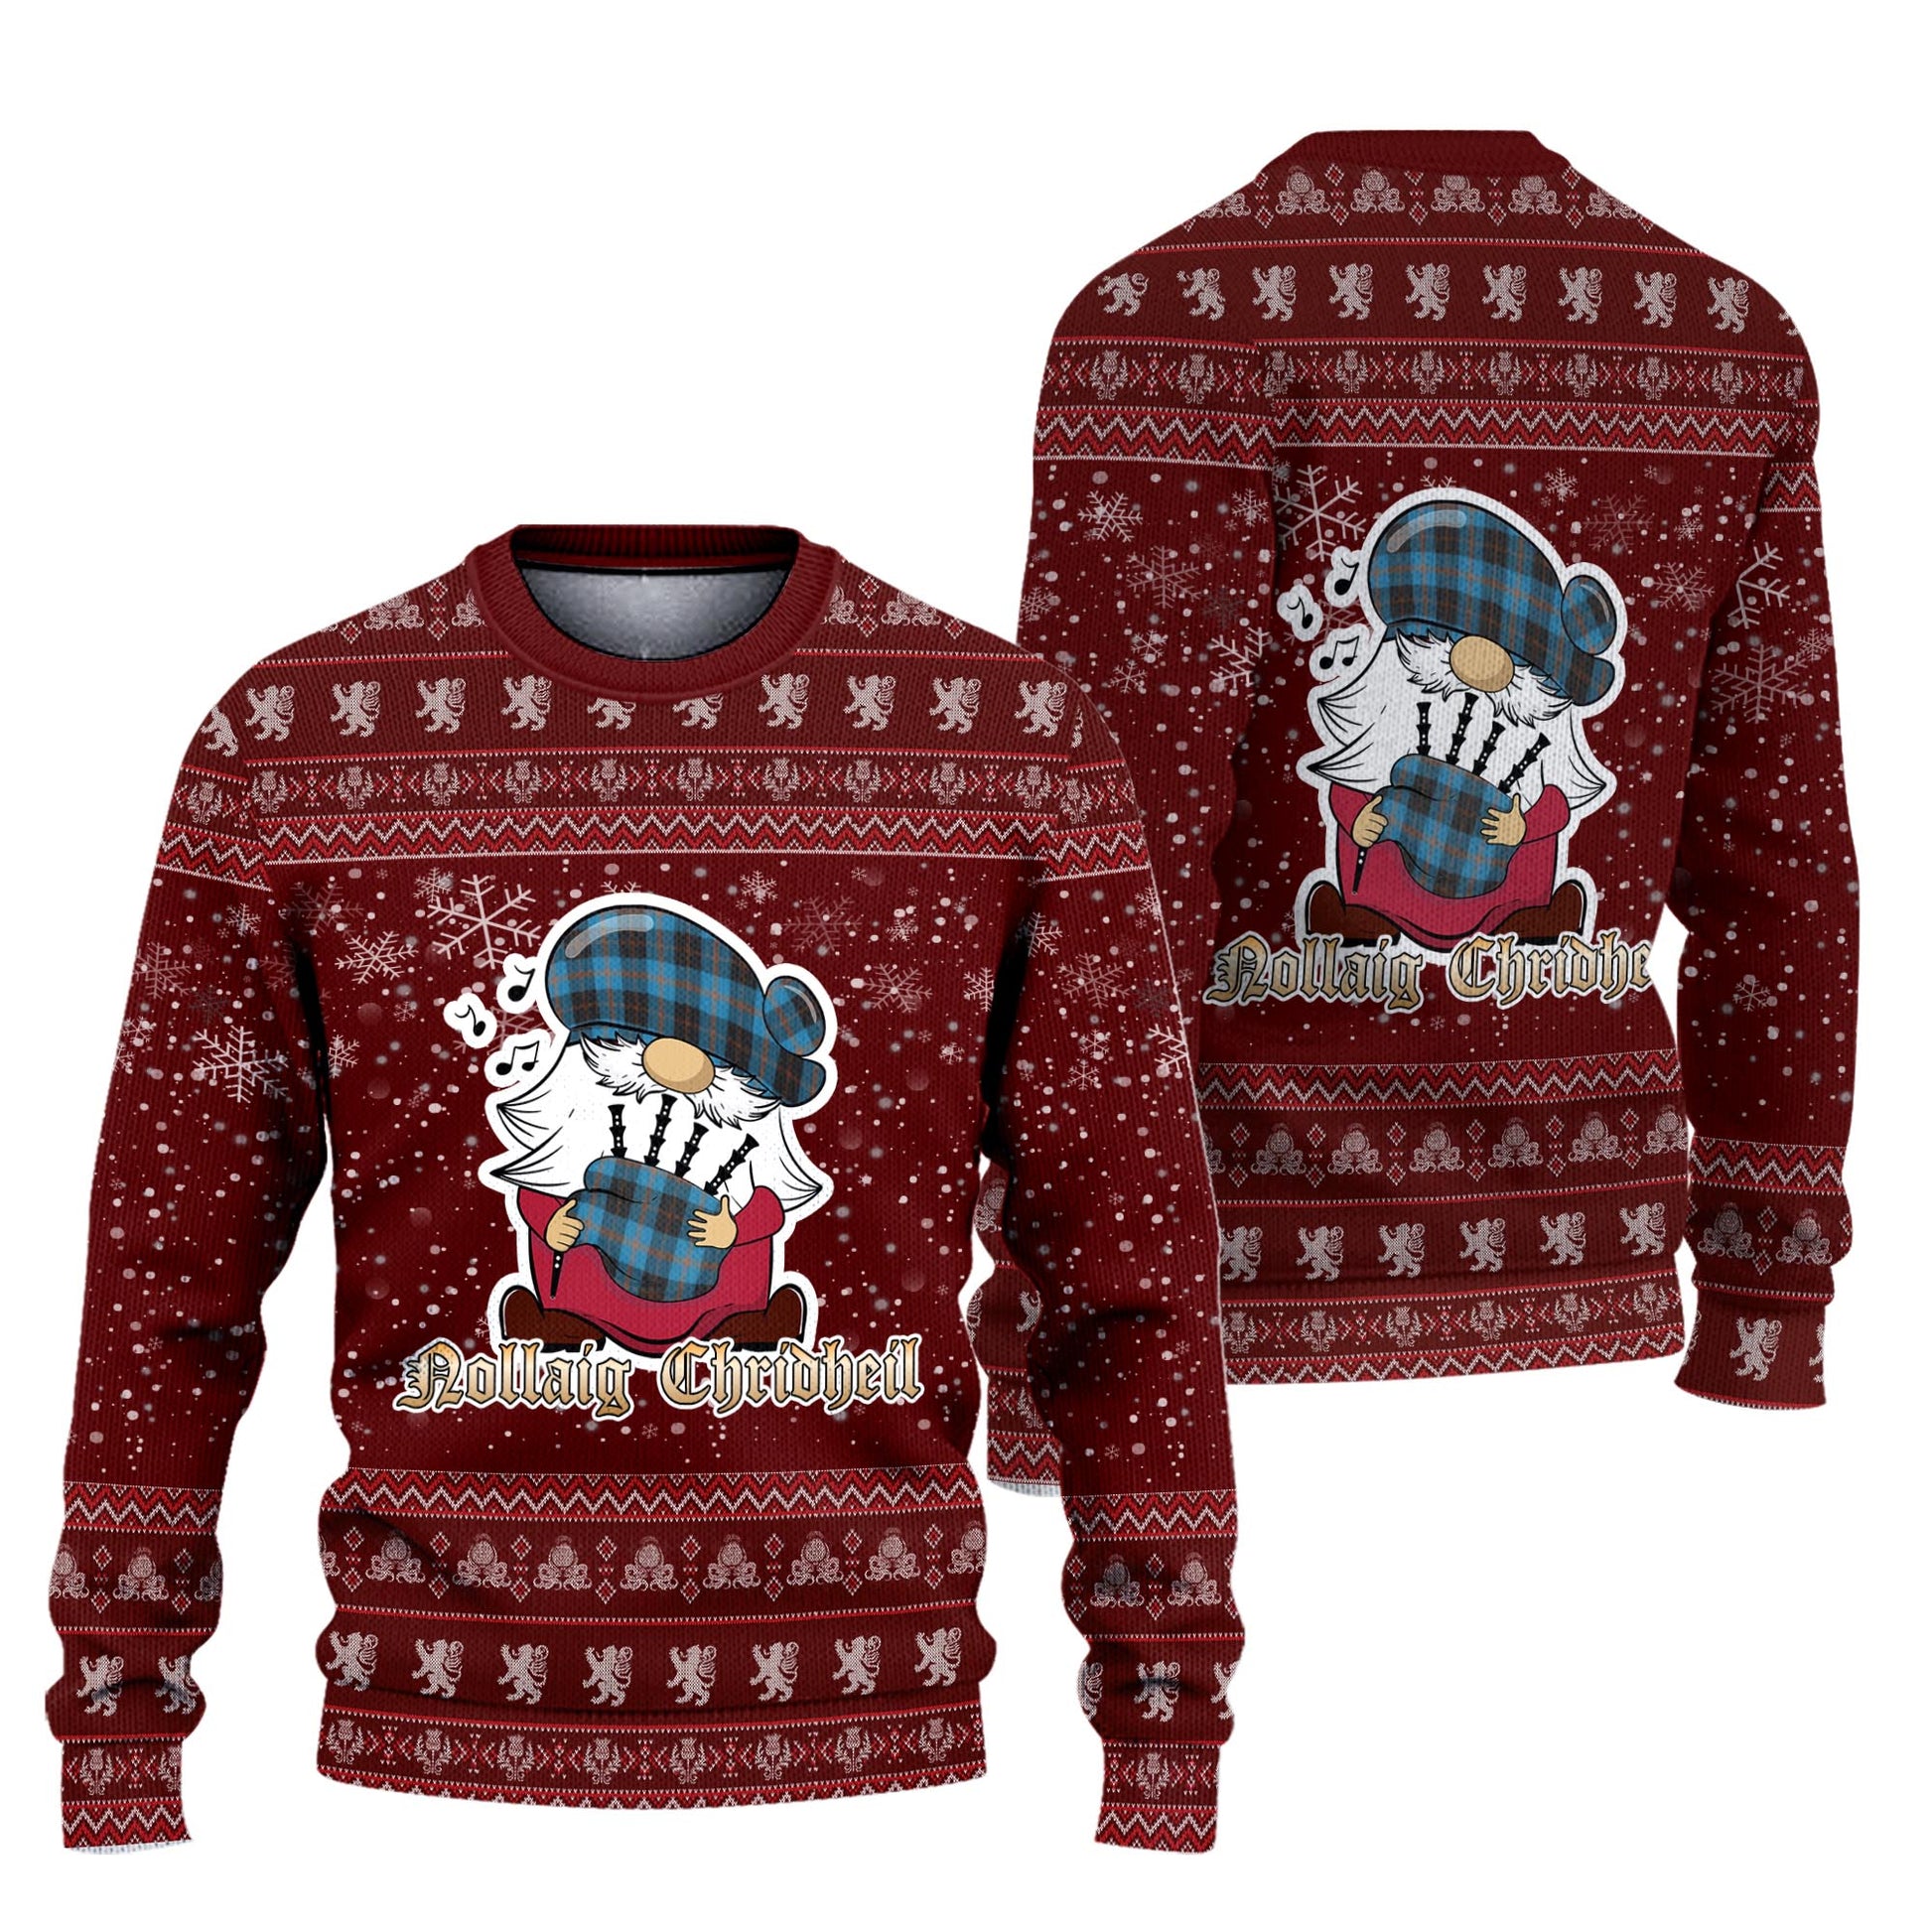 Garden Clan Christmas Family Knitted Sweater with Funny Gnome Playing Bagpipes Unisex Red - Tartanvibesclothing